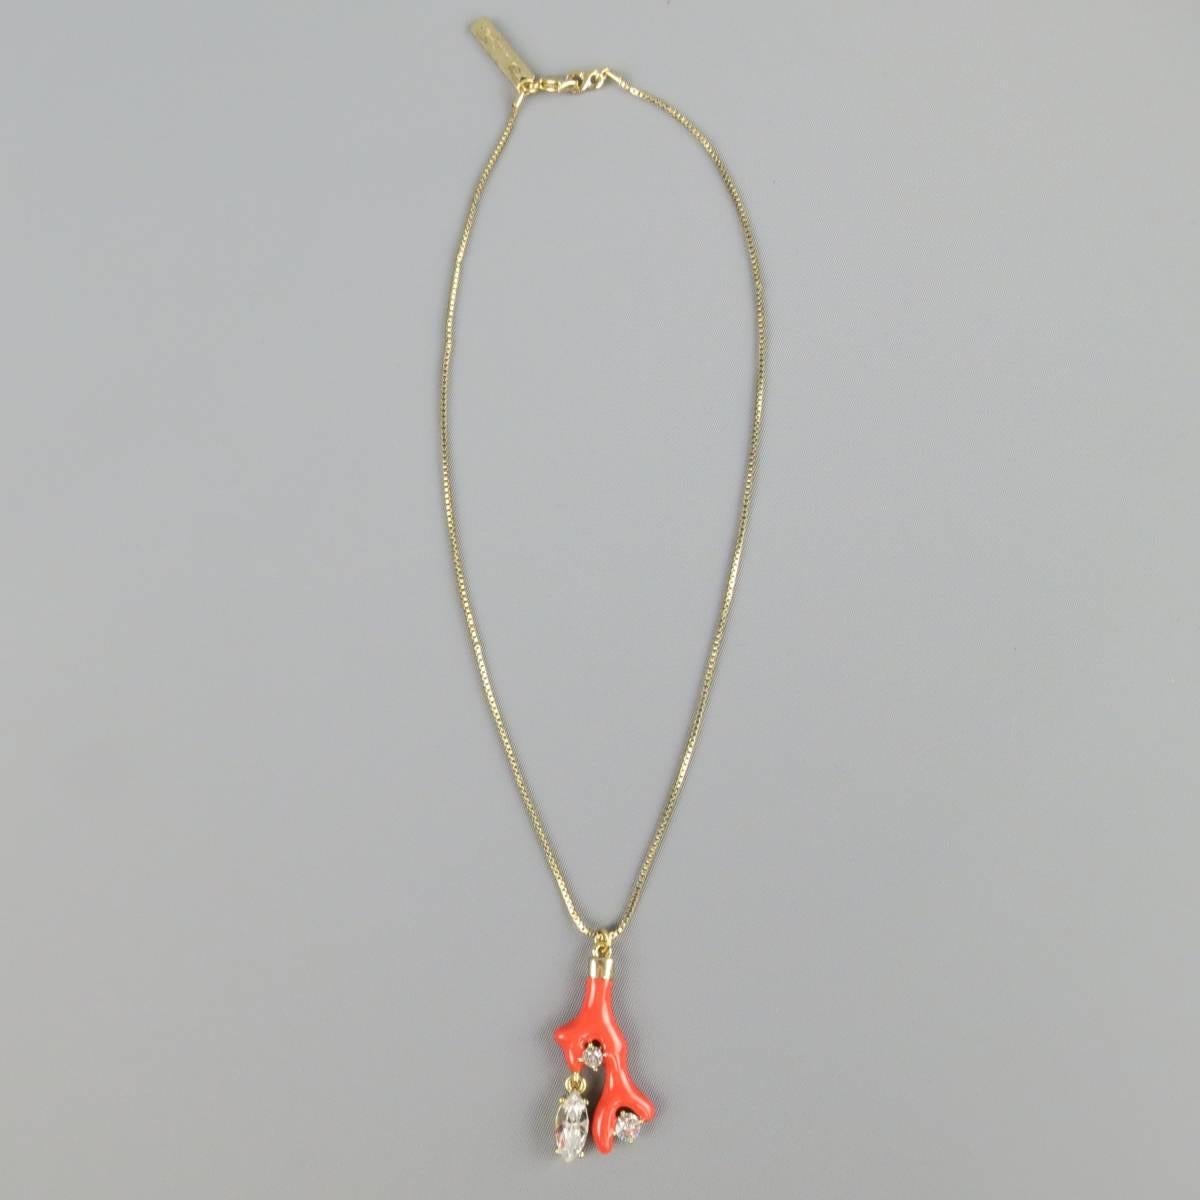 OSCAR DE LA RENTA necklace features a coral and rhinestone pendent with gold accents on a thin, gold colored chain. Features a lobster claw closure with Oscar De La Renta pendent. Includes dust bag and box. Made in USA.
 
Excellent Pre-Owned